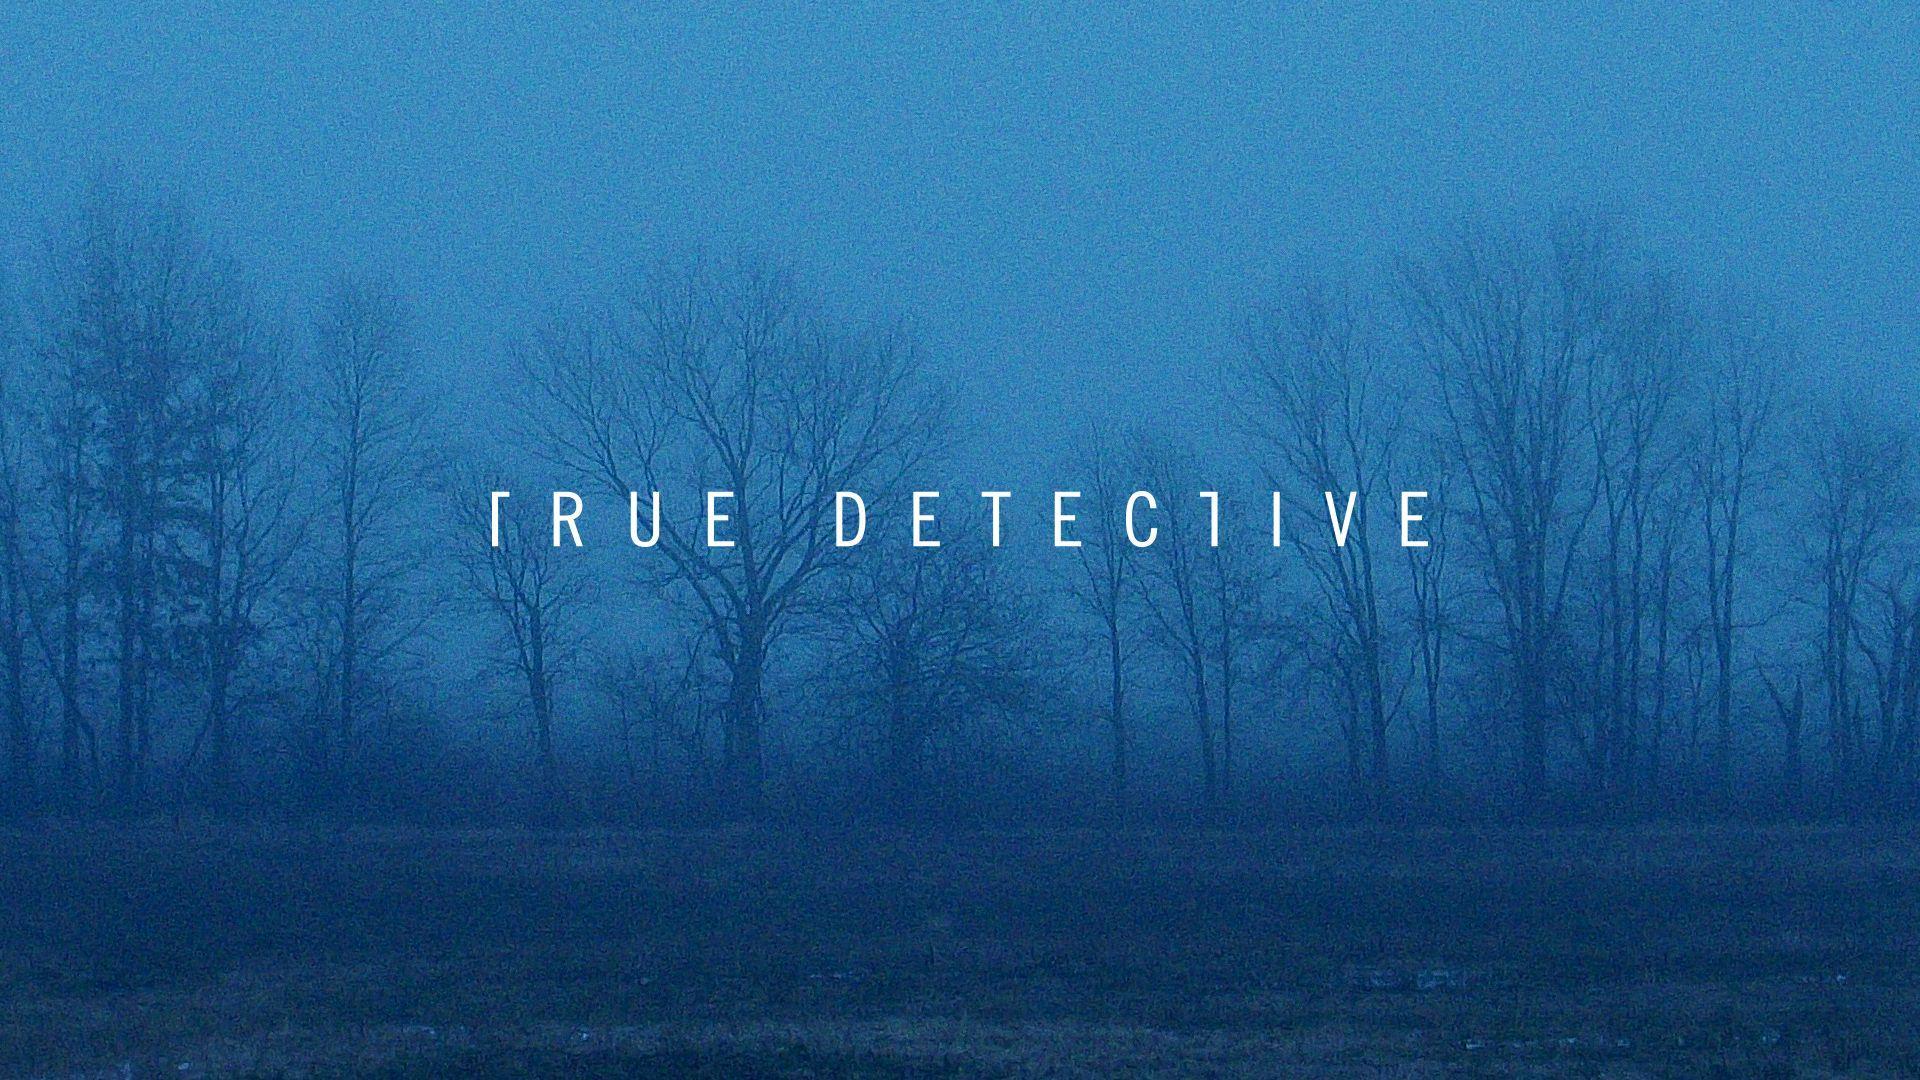 True Detective Trees Wallpaper by HD Wallpaper Daily